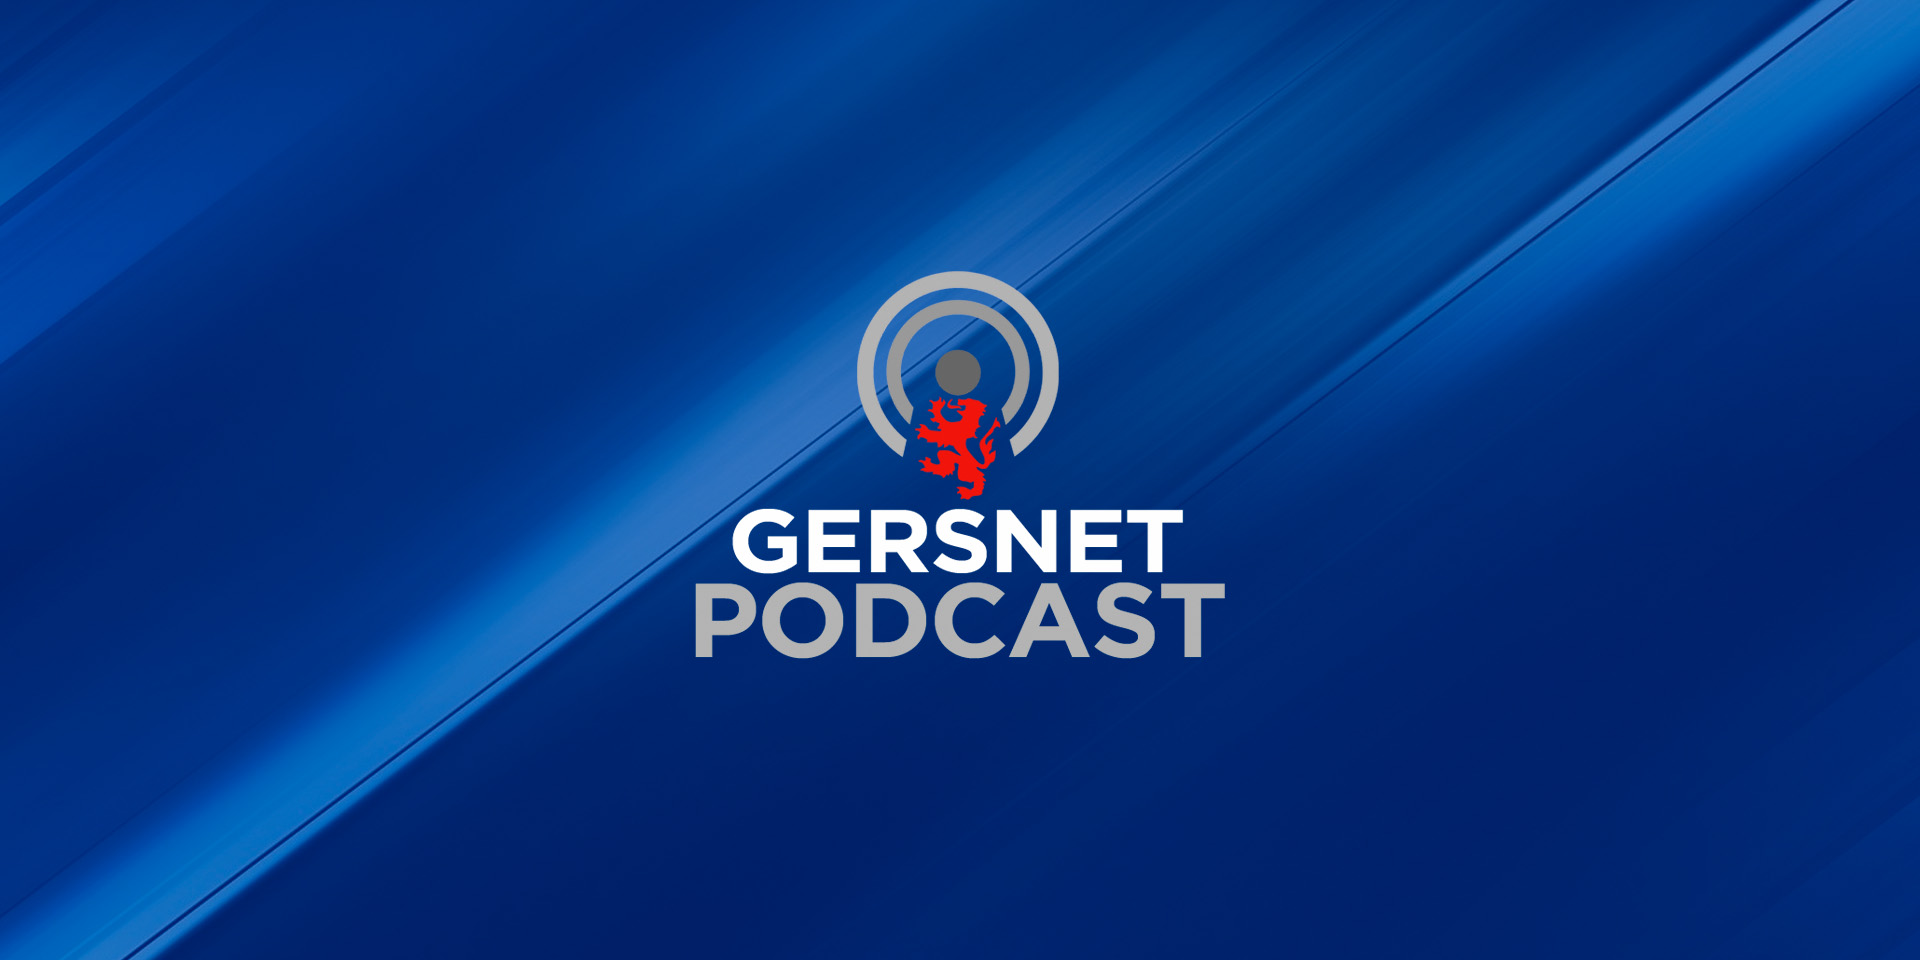 Gersnet Podcast 326 - The Good, the Bad and the Ugly